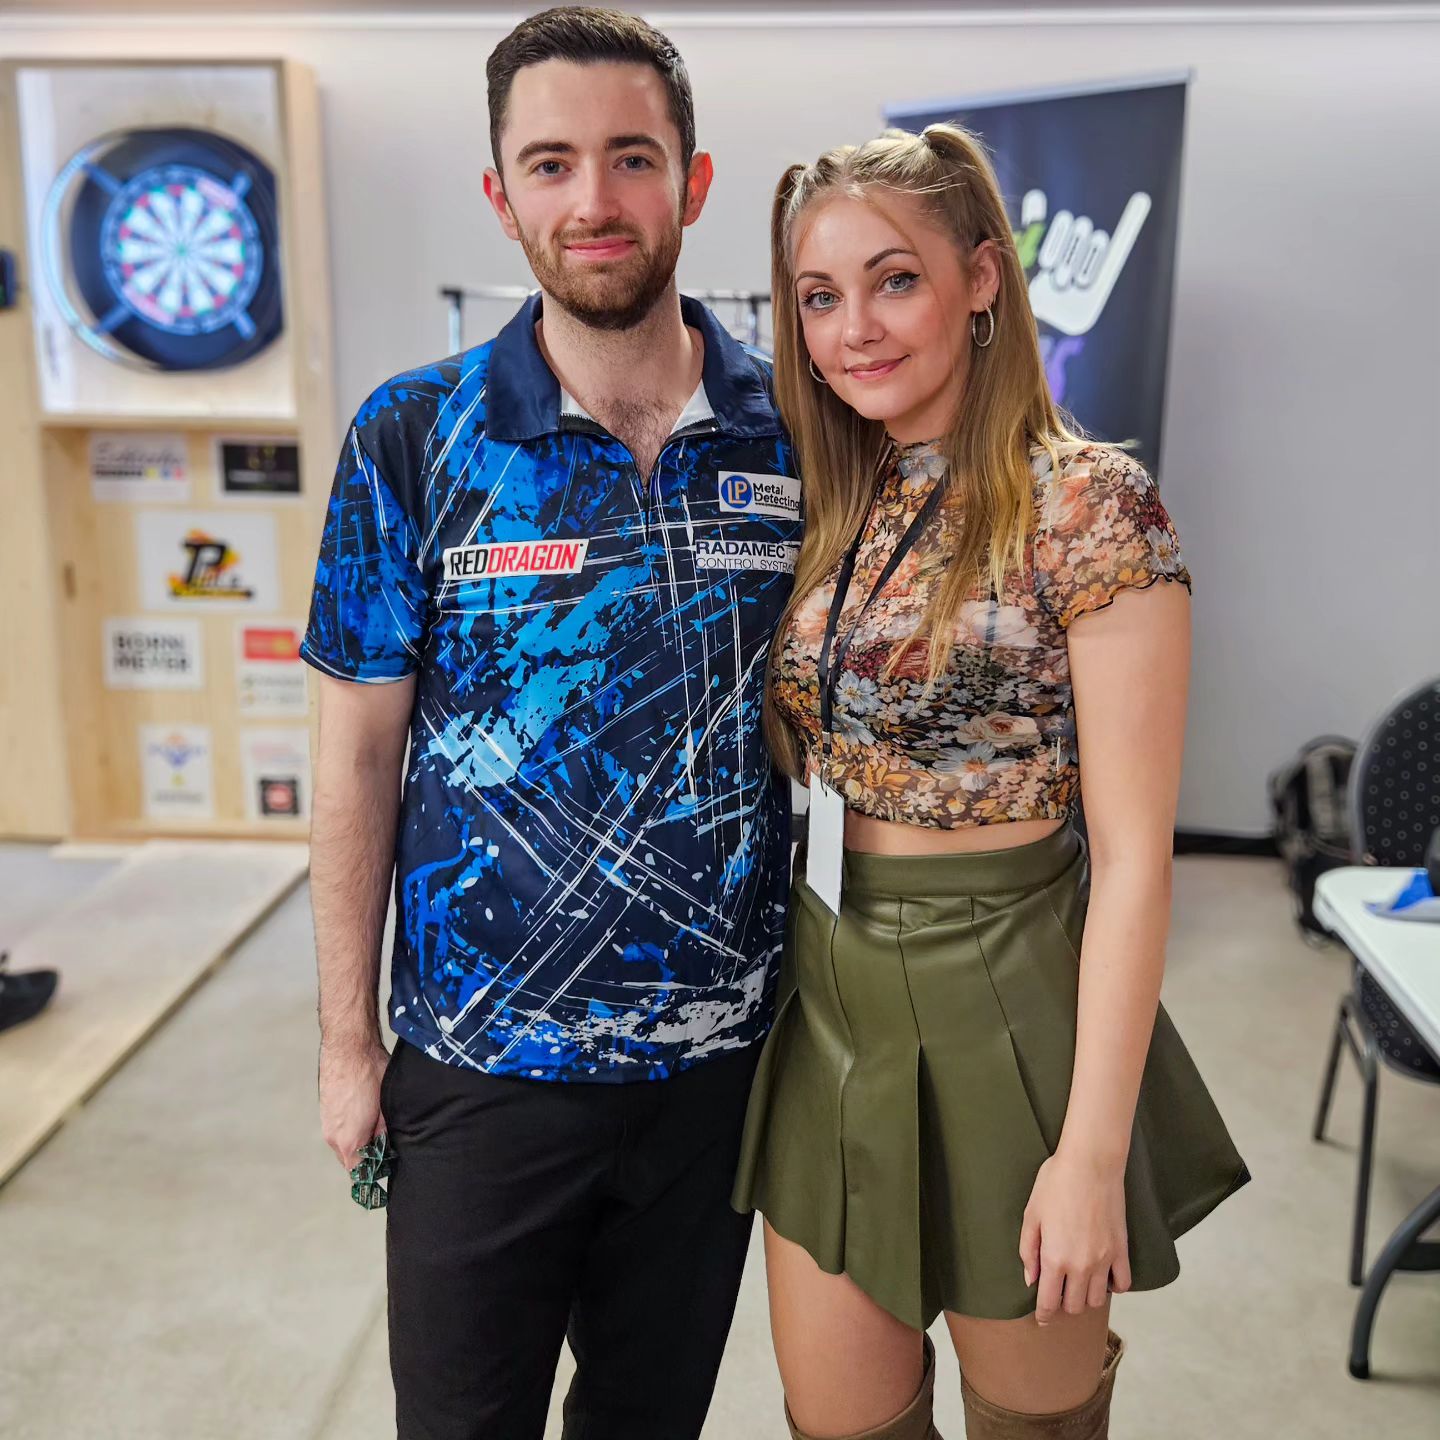 She has met some of the games top stars